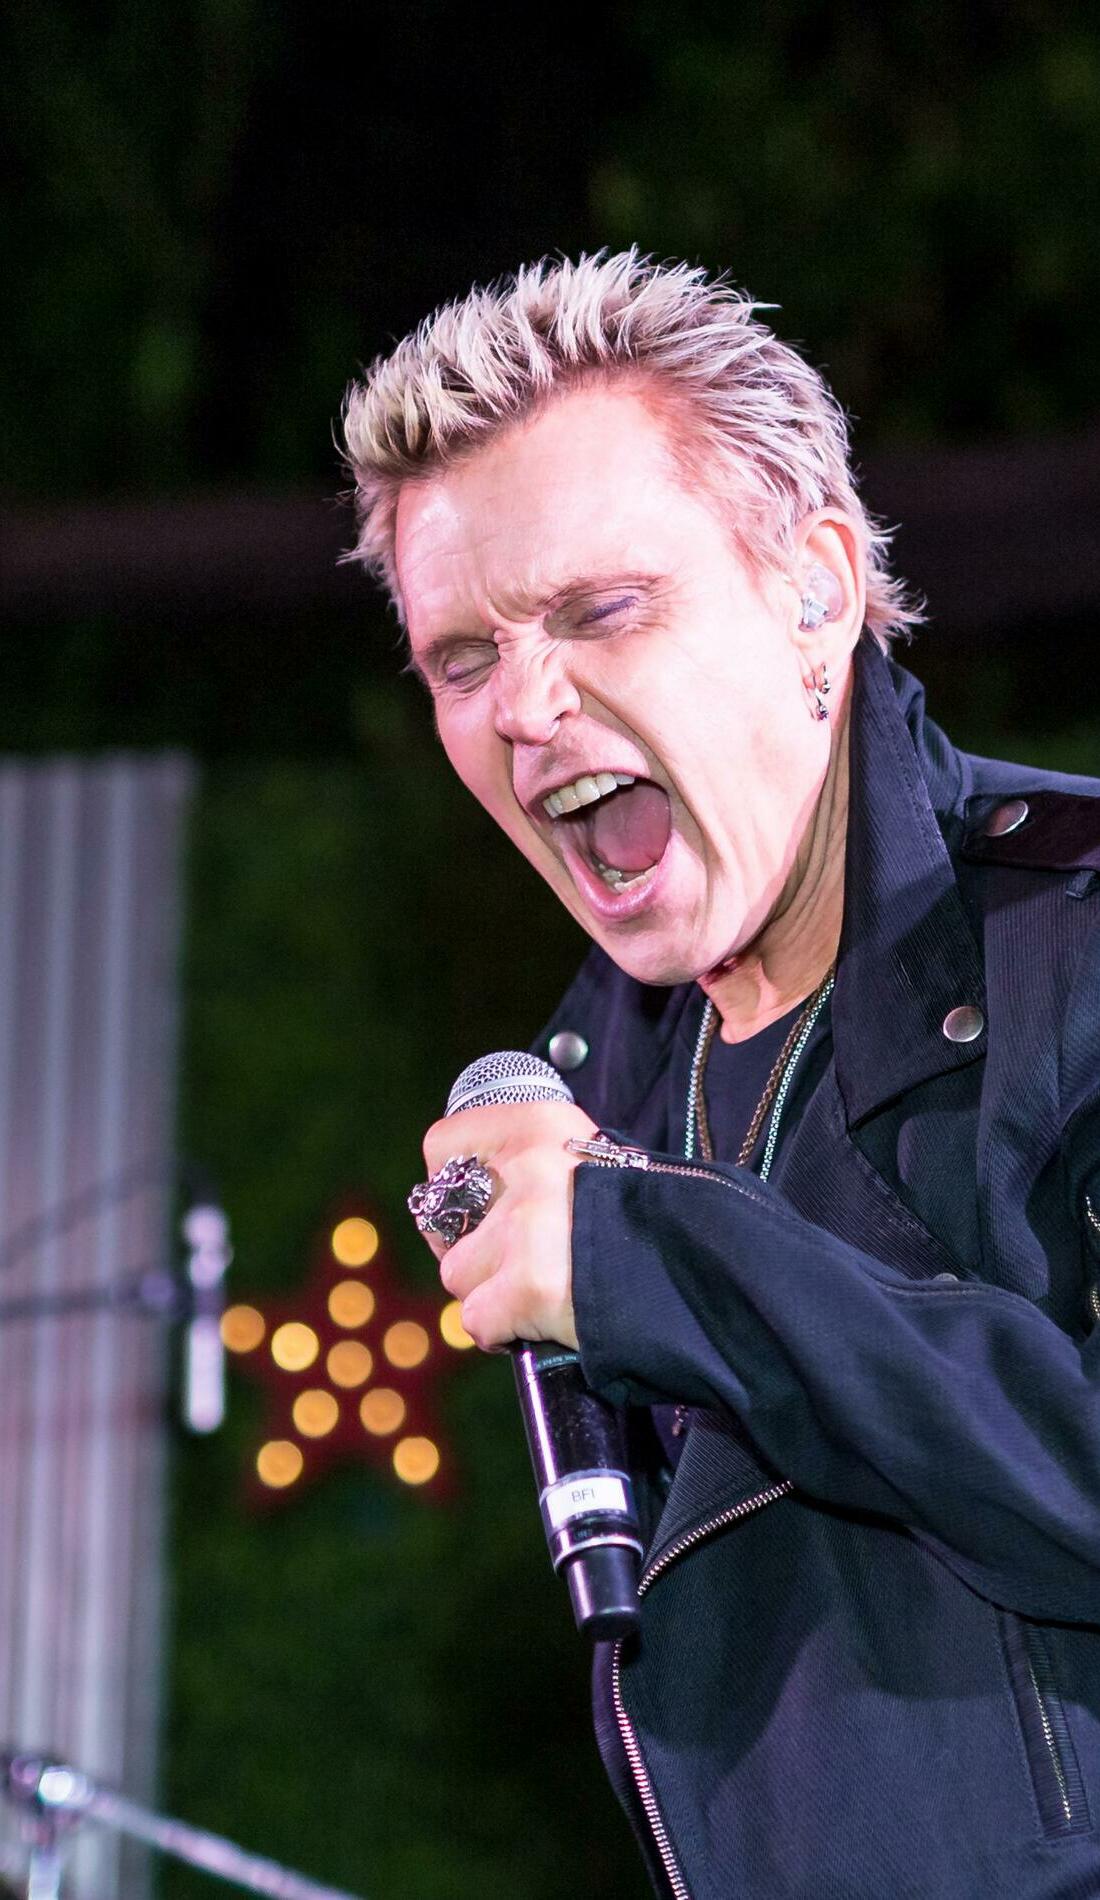 A Billy Idol live event